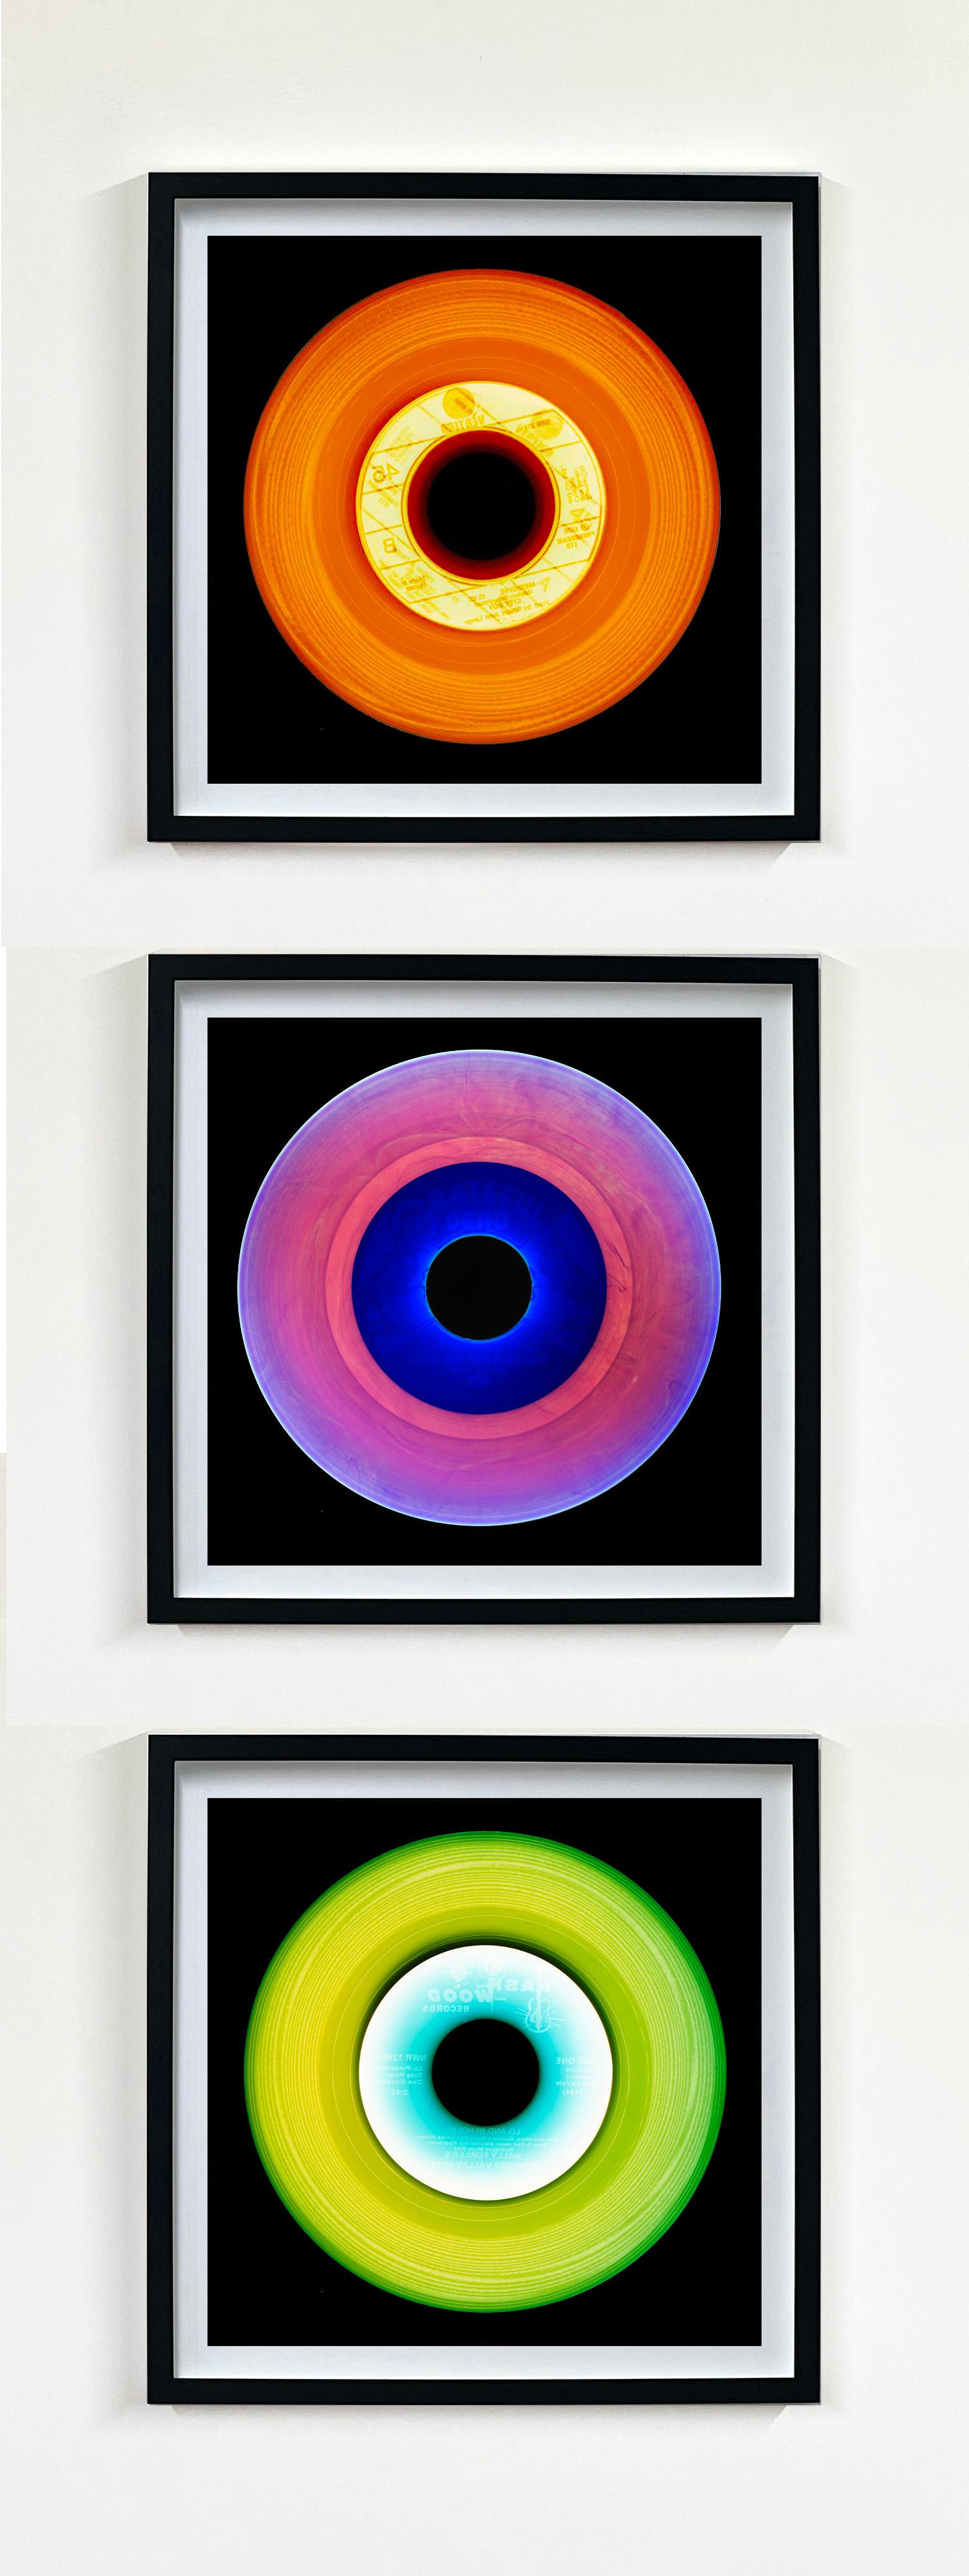 Heidler & Heeps Vinyl Collection Set of Three Framed Artworks.
Acclaimed contemporary photographers, Richard Heeps and Natasha Heidler have collaborated to make this beautifully mesmerising collection. A celebration of the vinyl record and analogue